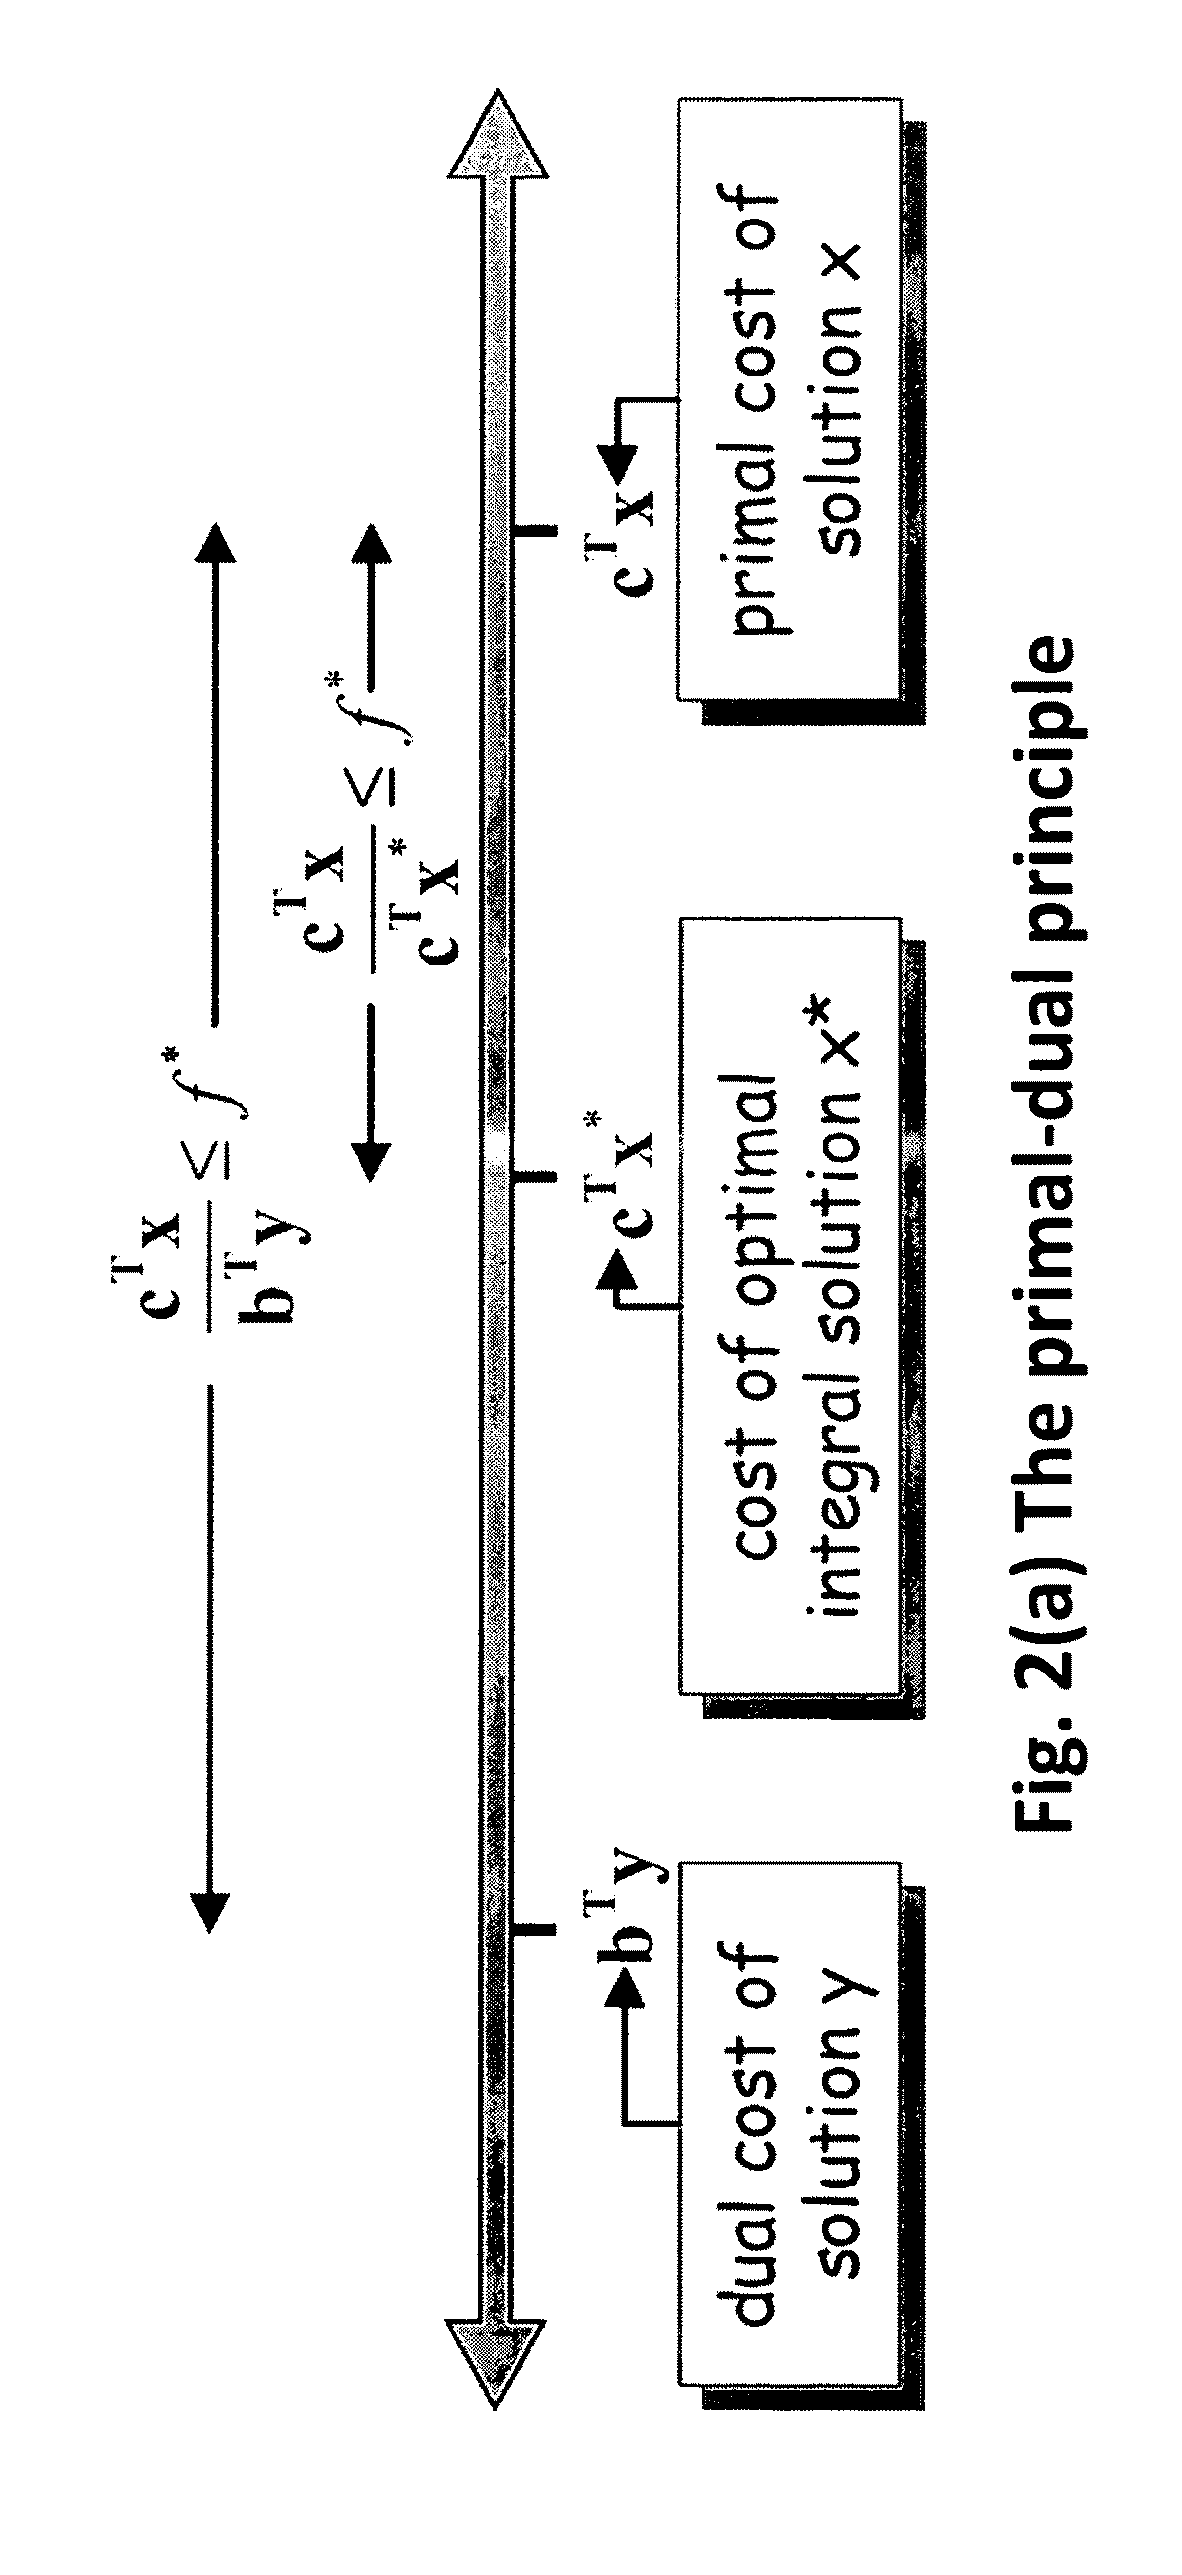 System and method for optimizing single and dynamic markov random fields with primal dual strategies